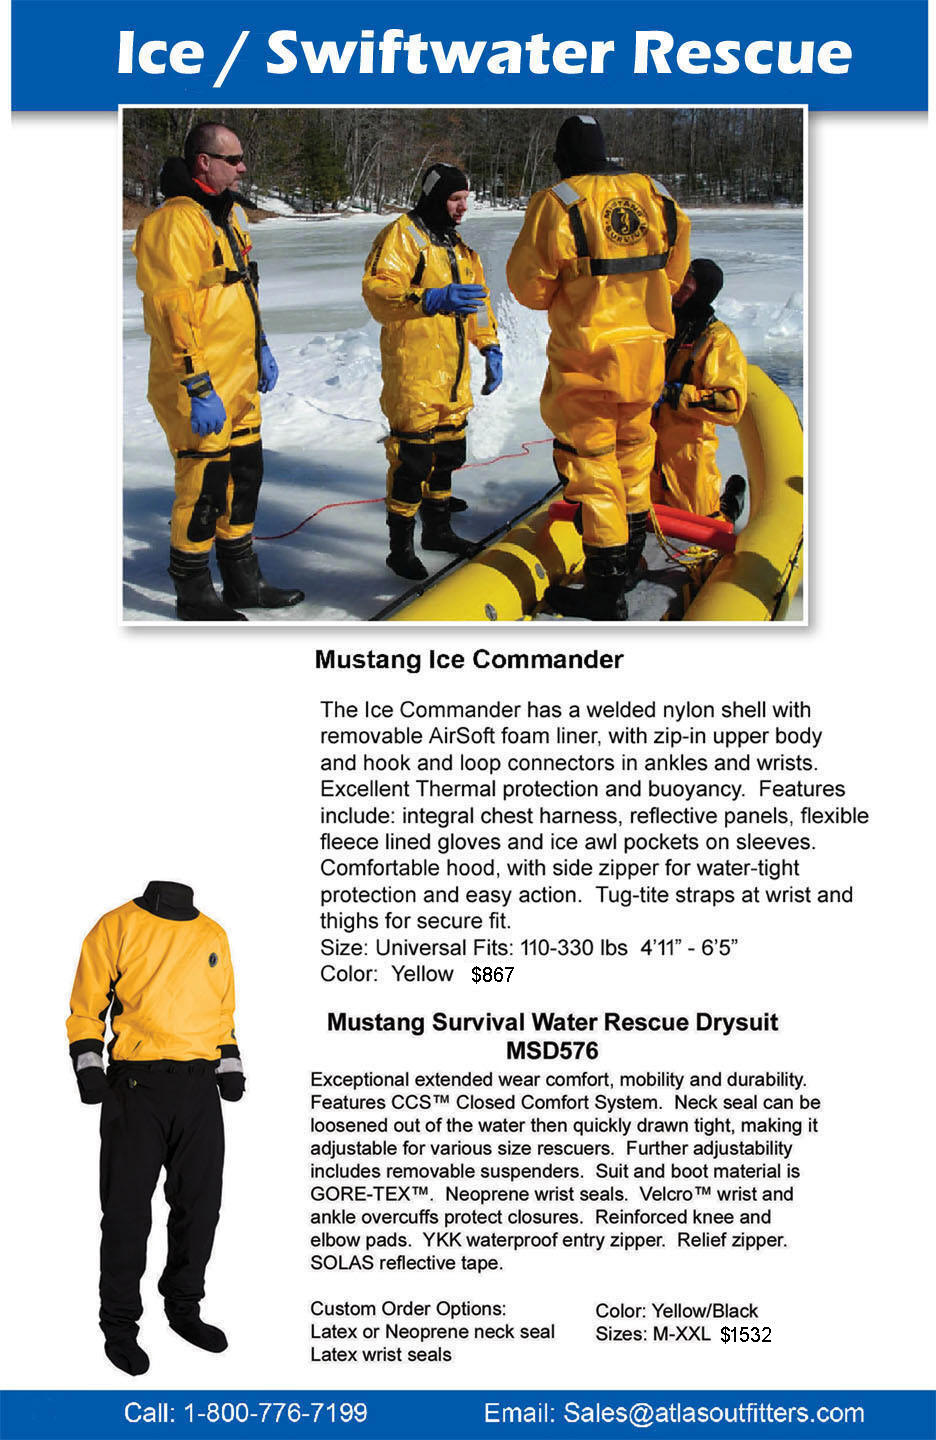 Mustang Survival IC9001-03 Ice Commander and Mustang Survival dry suit